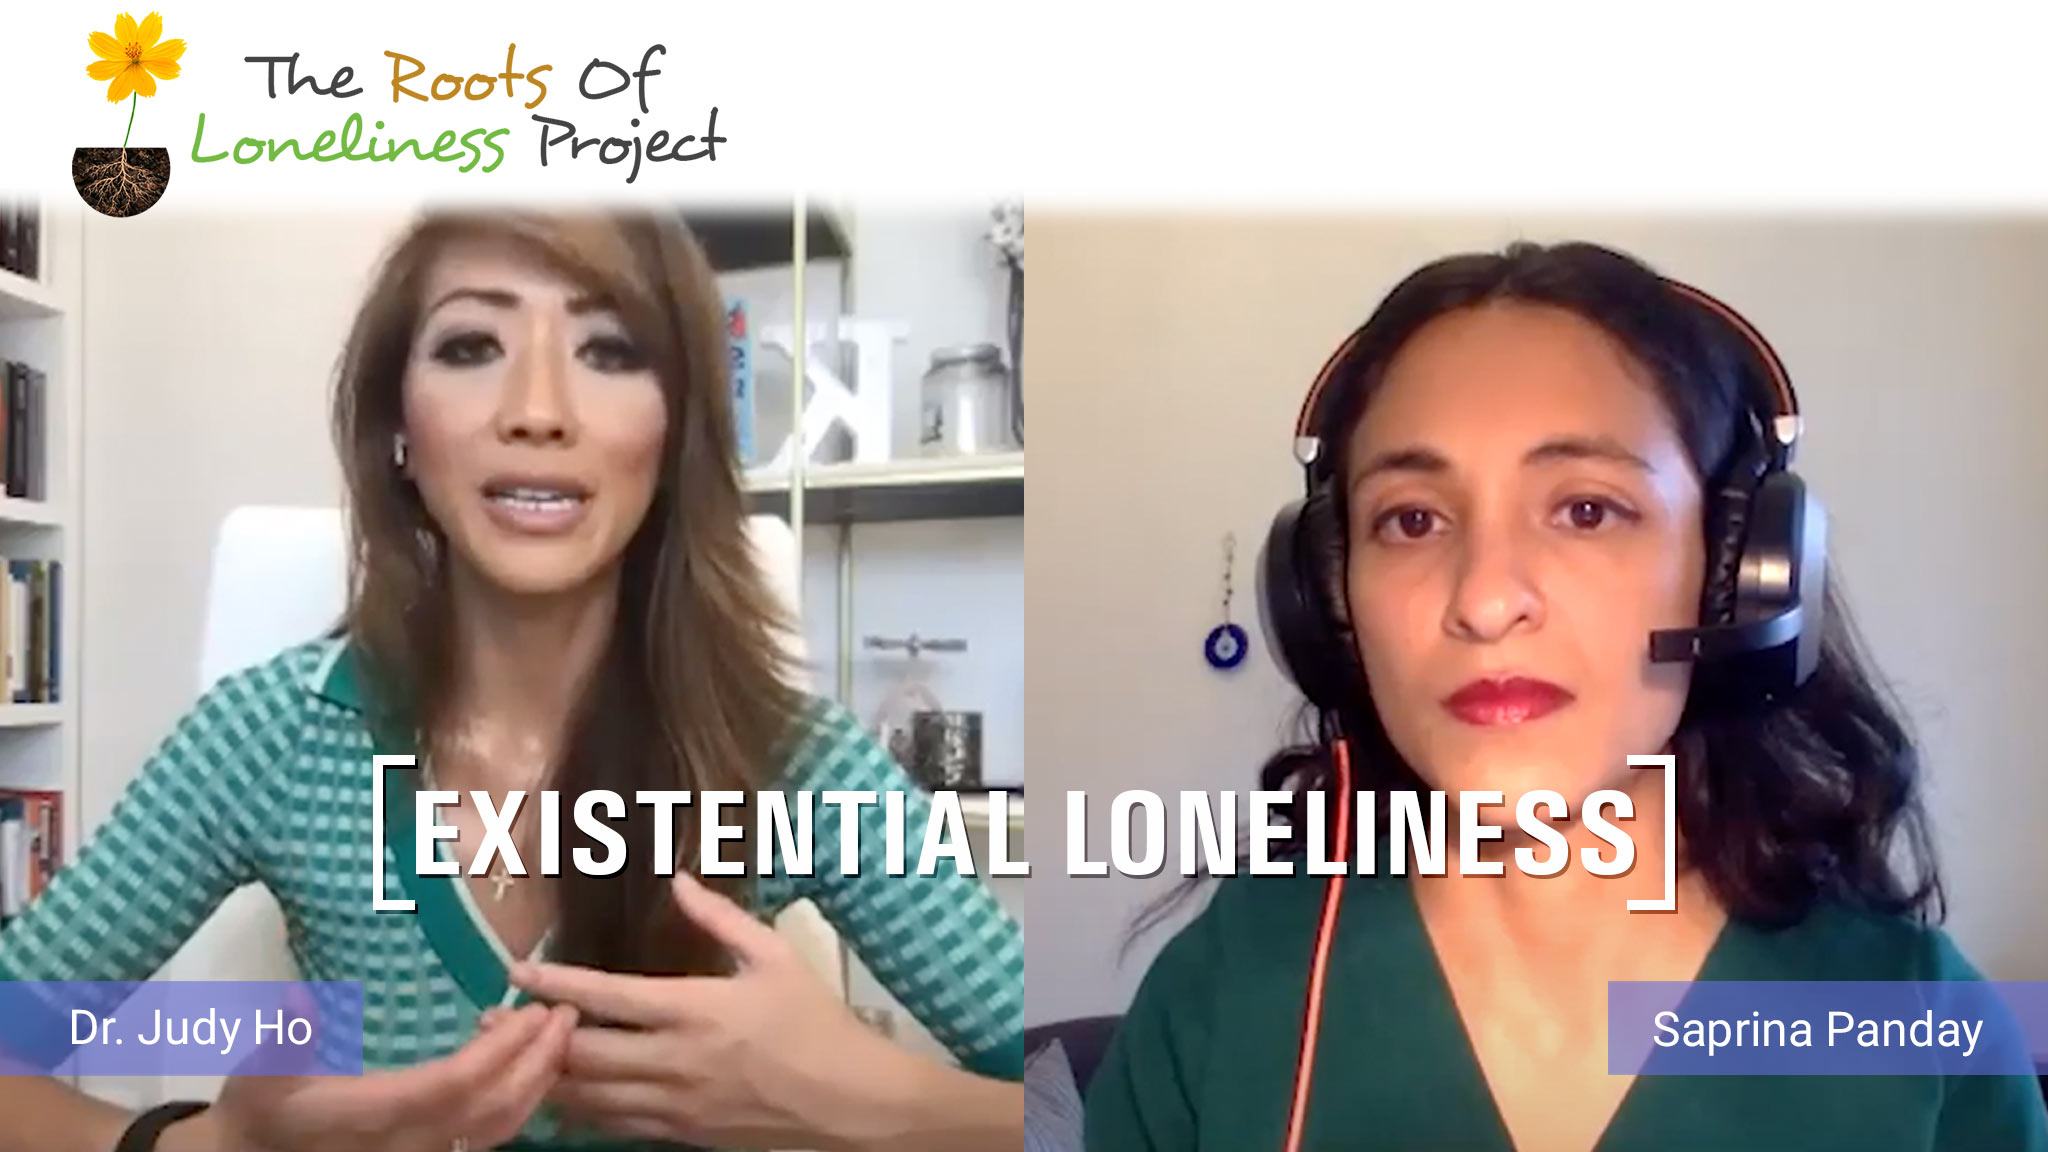 Screenshot Of Judy Ho Speaking About Existential Loneliness To "On Loneliness" Host Saprina Panday